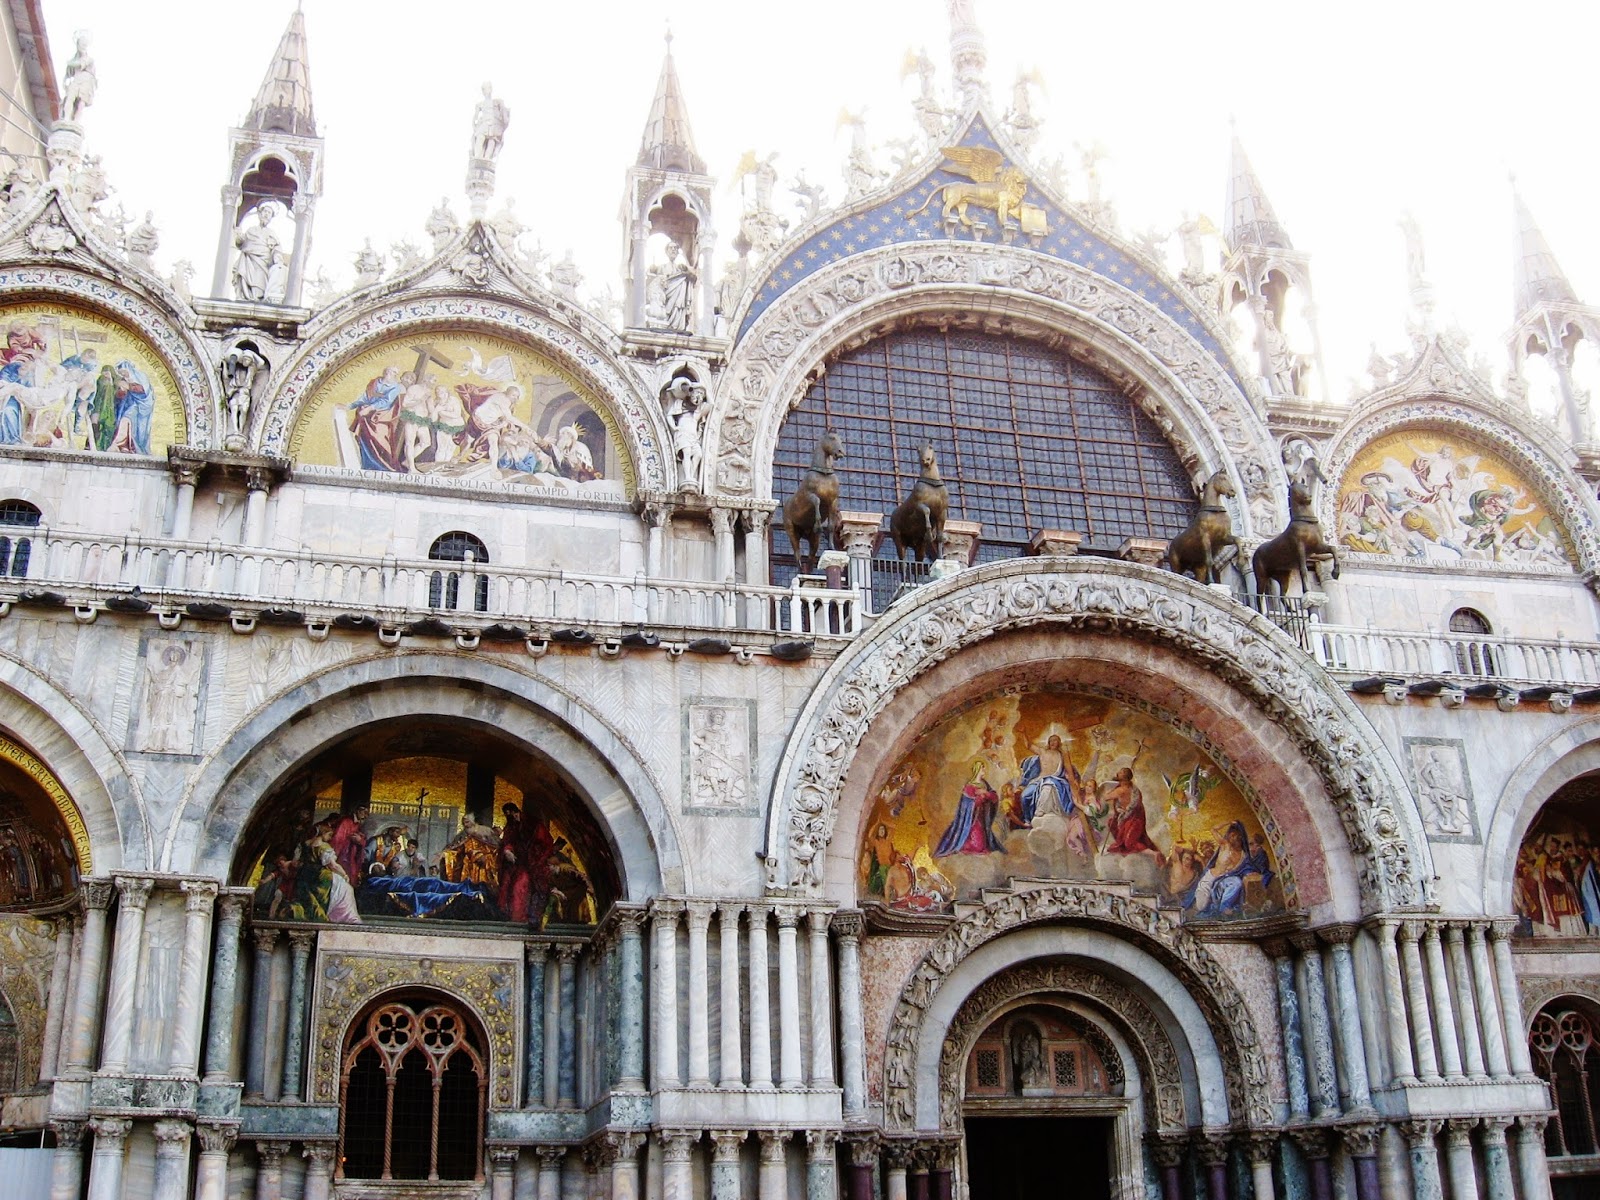 Bijuleni - Travel Guide for a Day Trip in Venice 